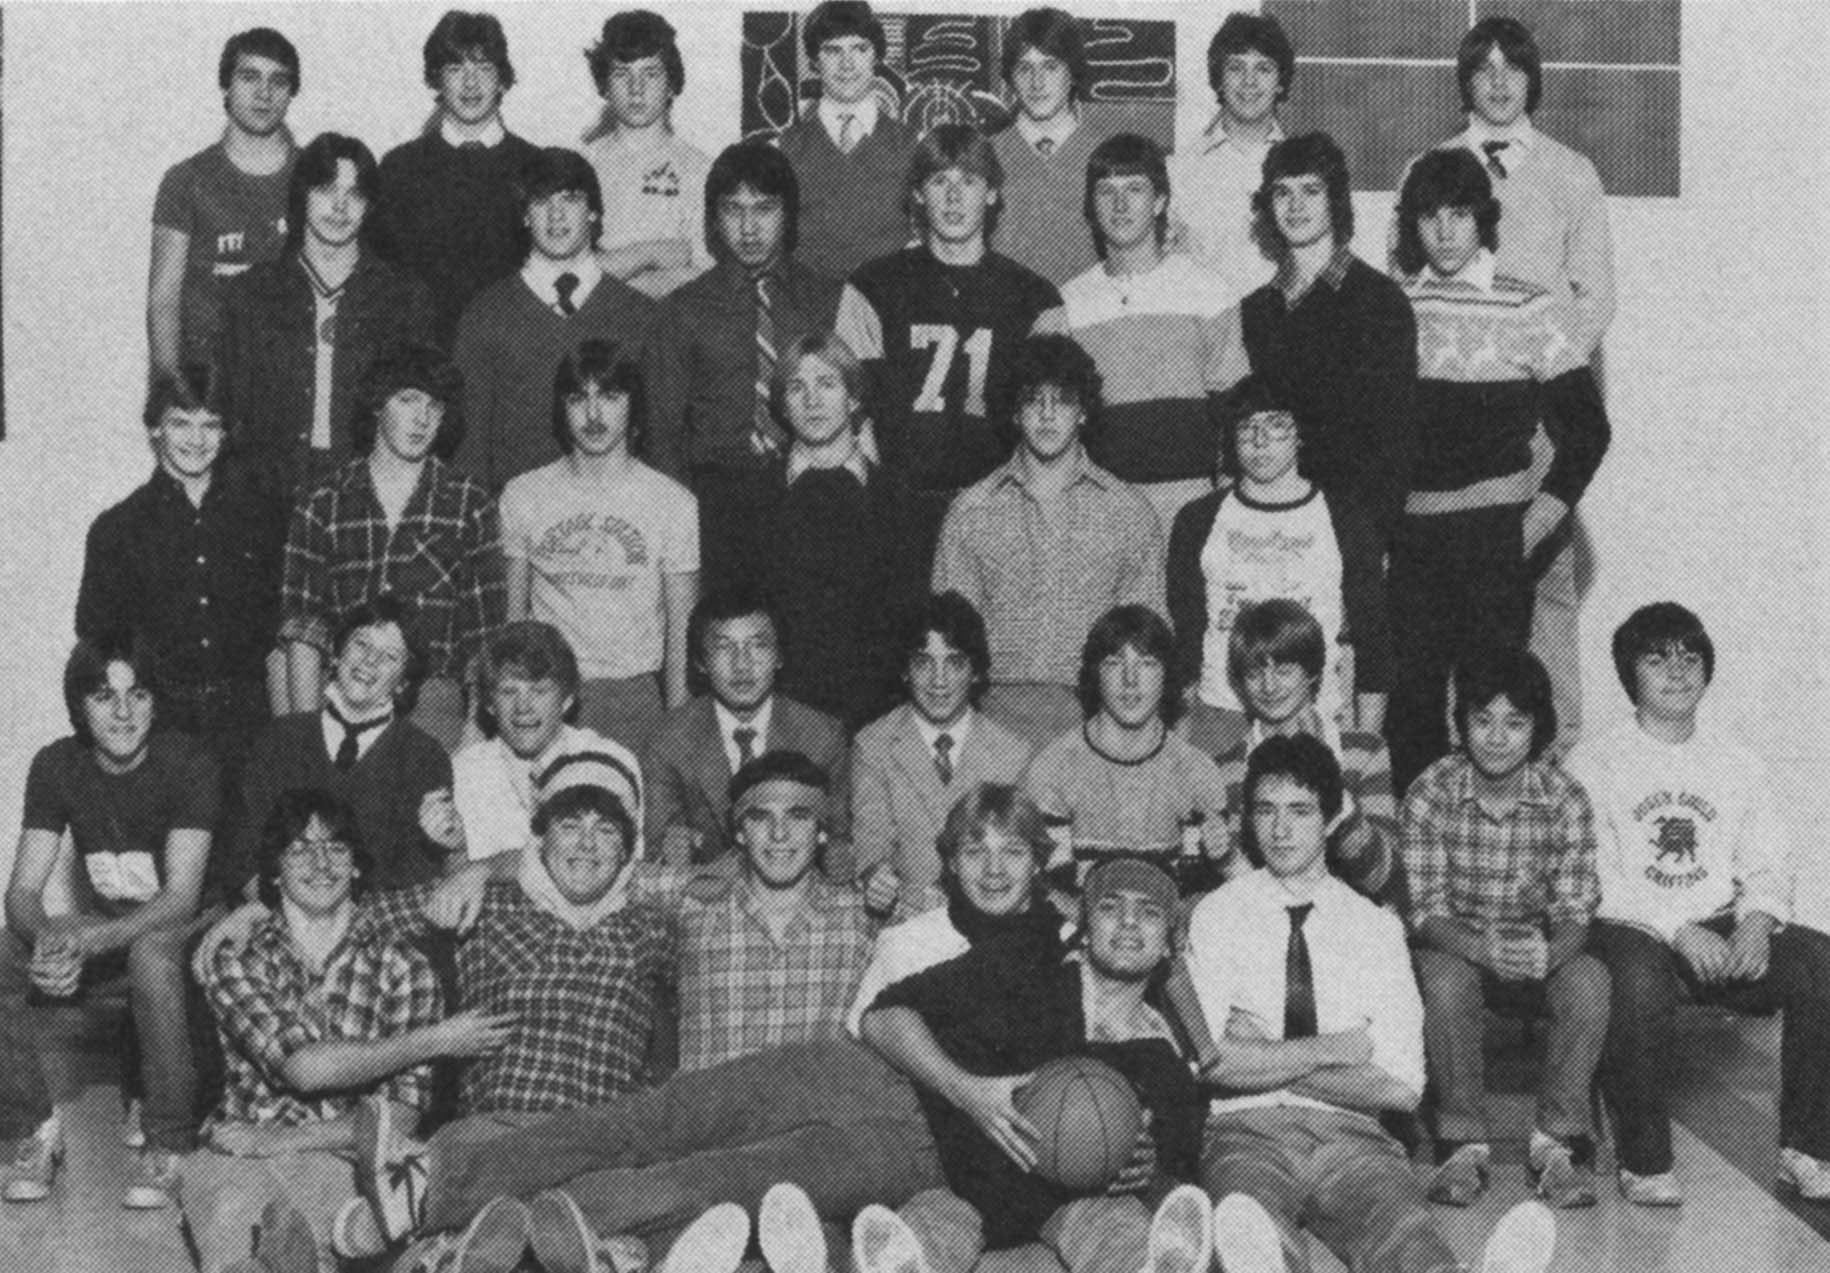 (Click to magnify) NO captions (again). Ben Kester (holding the guy with the basketball), Harold Kim, Scott Yake & John Miller (4th, 5th and 6th from left, 2nd row), Dale Winder (1st left, 3rd row), Dan Martin (4th from left, 4th row), Jeff McNair (2nd fr